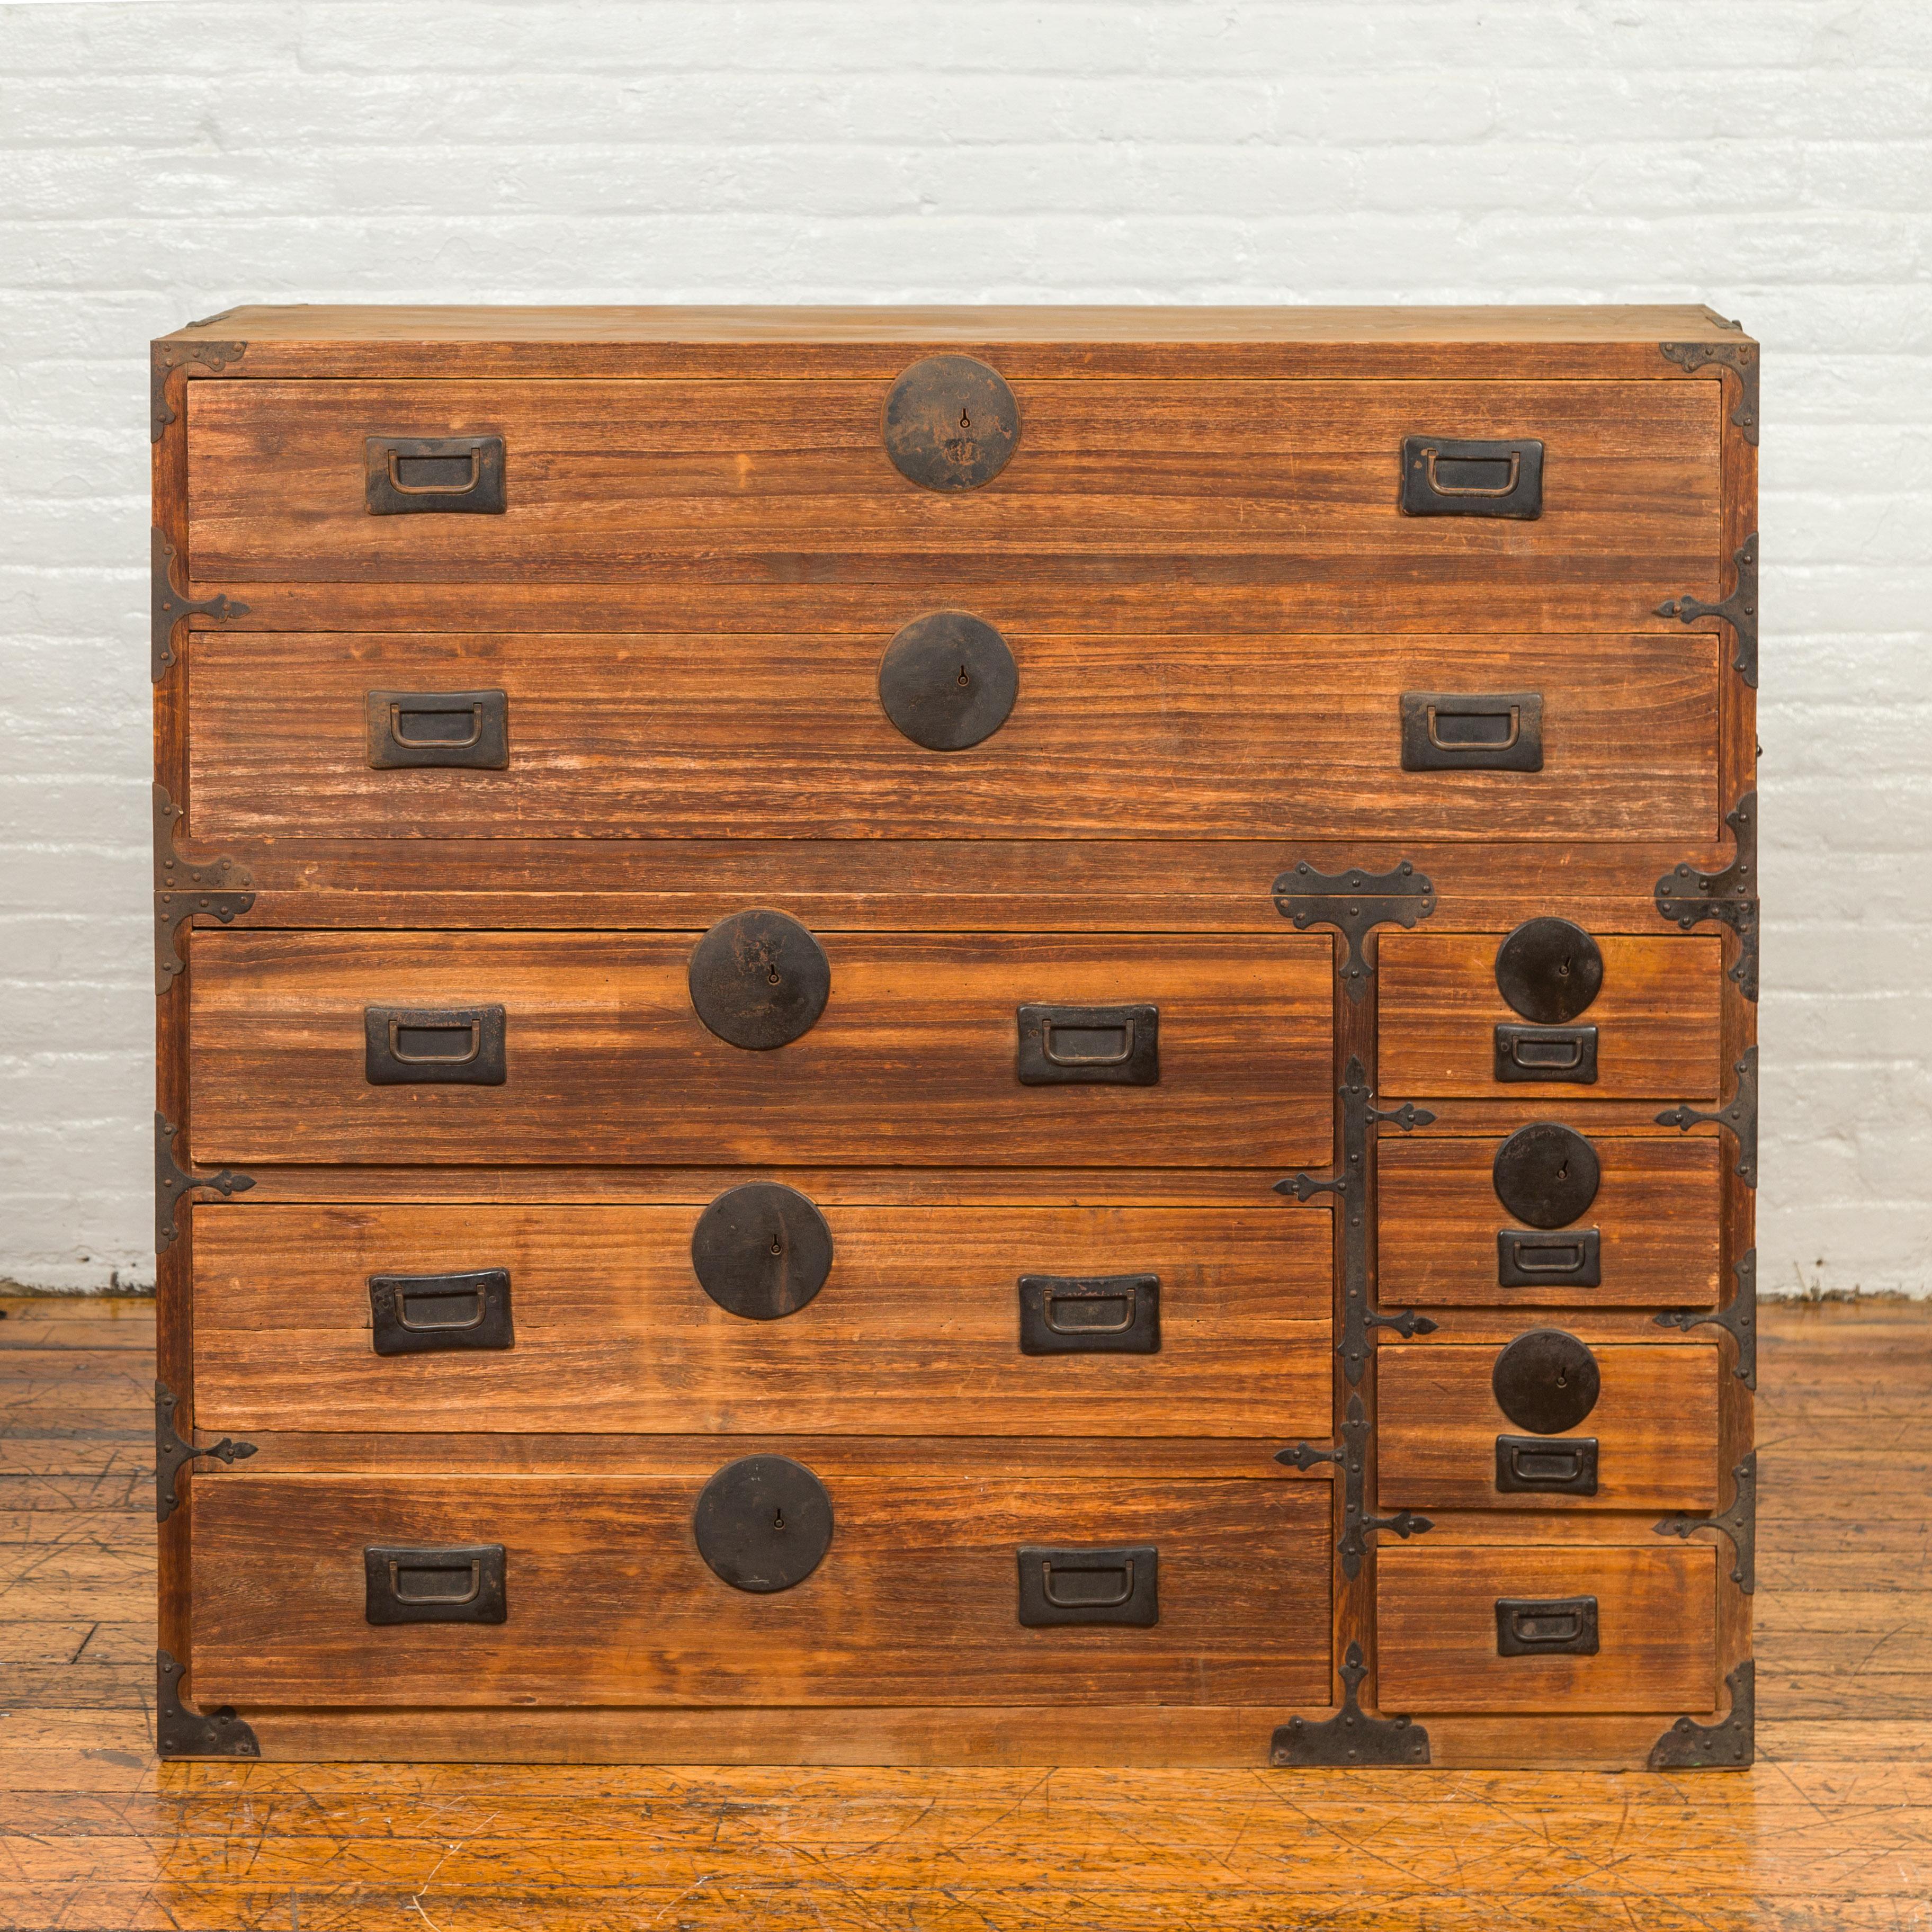 A Japanese Meiji period kiri wood two-section tansu clothing chest from the 19th century with multiple drawers, iron hardware and medallions. Crafted in Japan during the Meiji period, this kiri wood tansu chest captures our attention with its